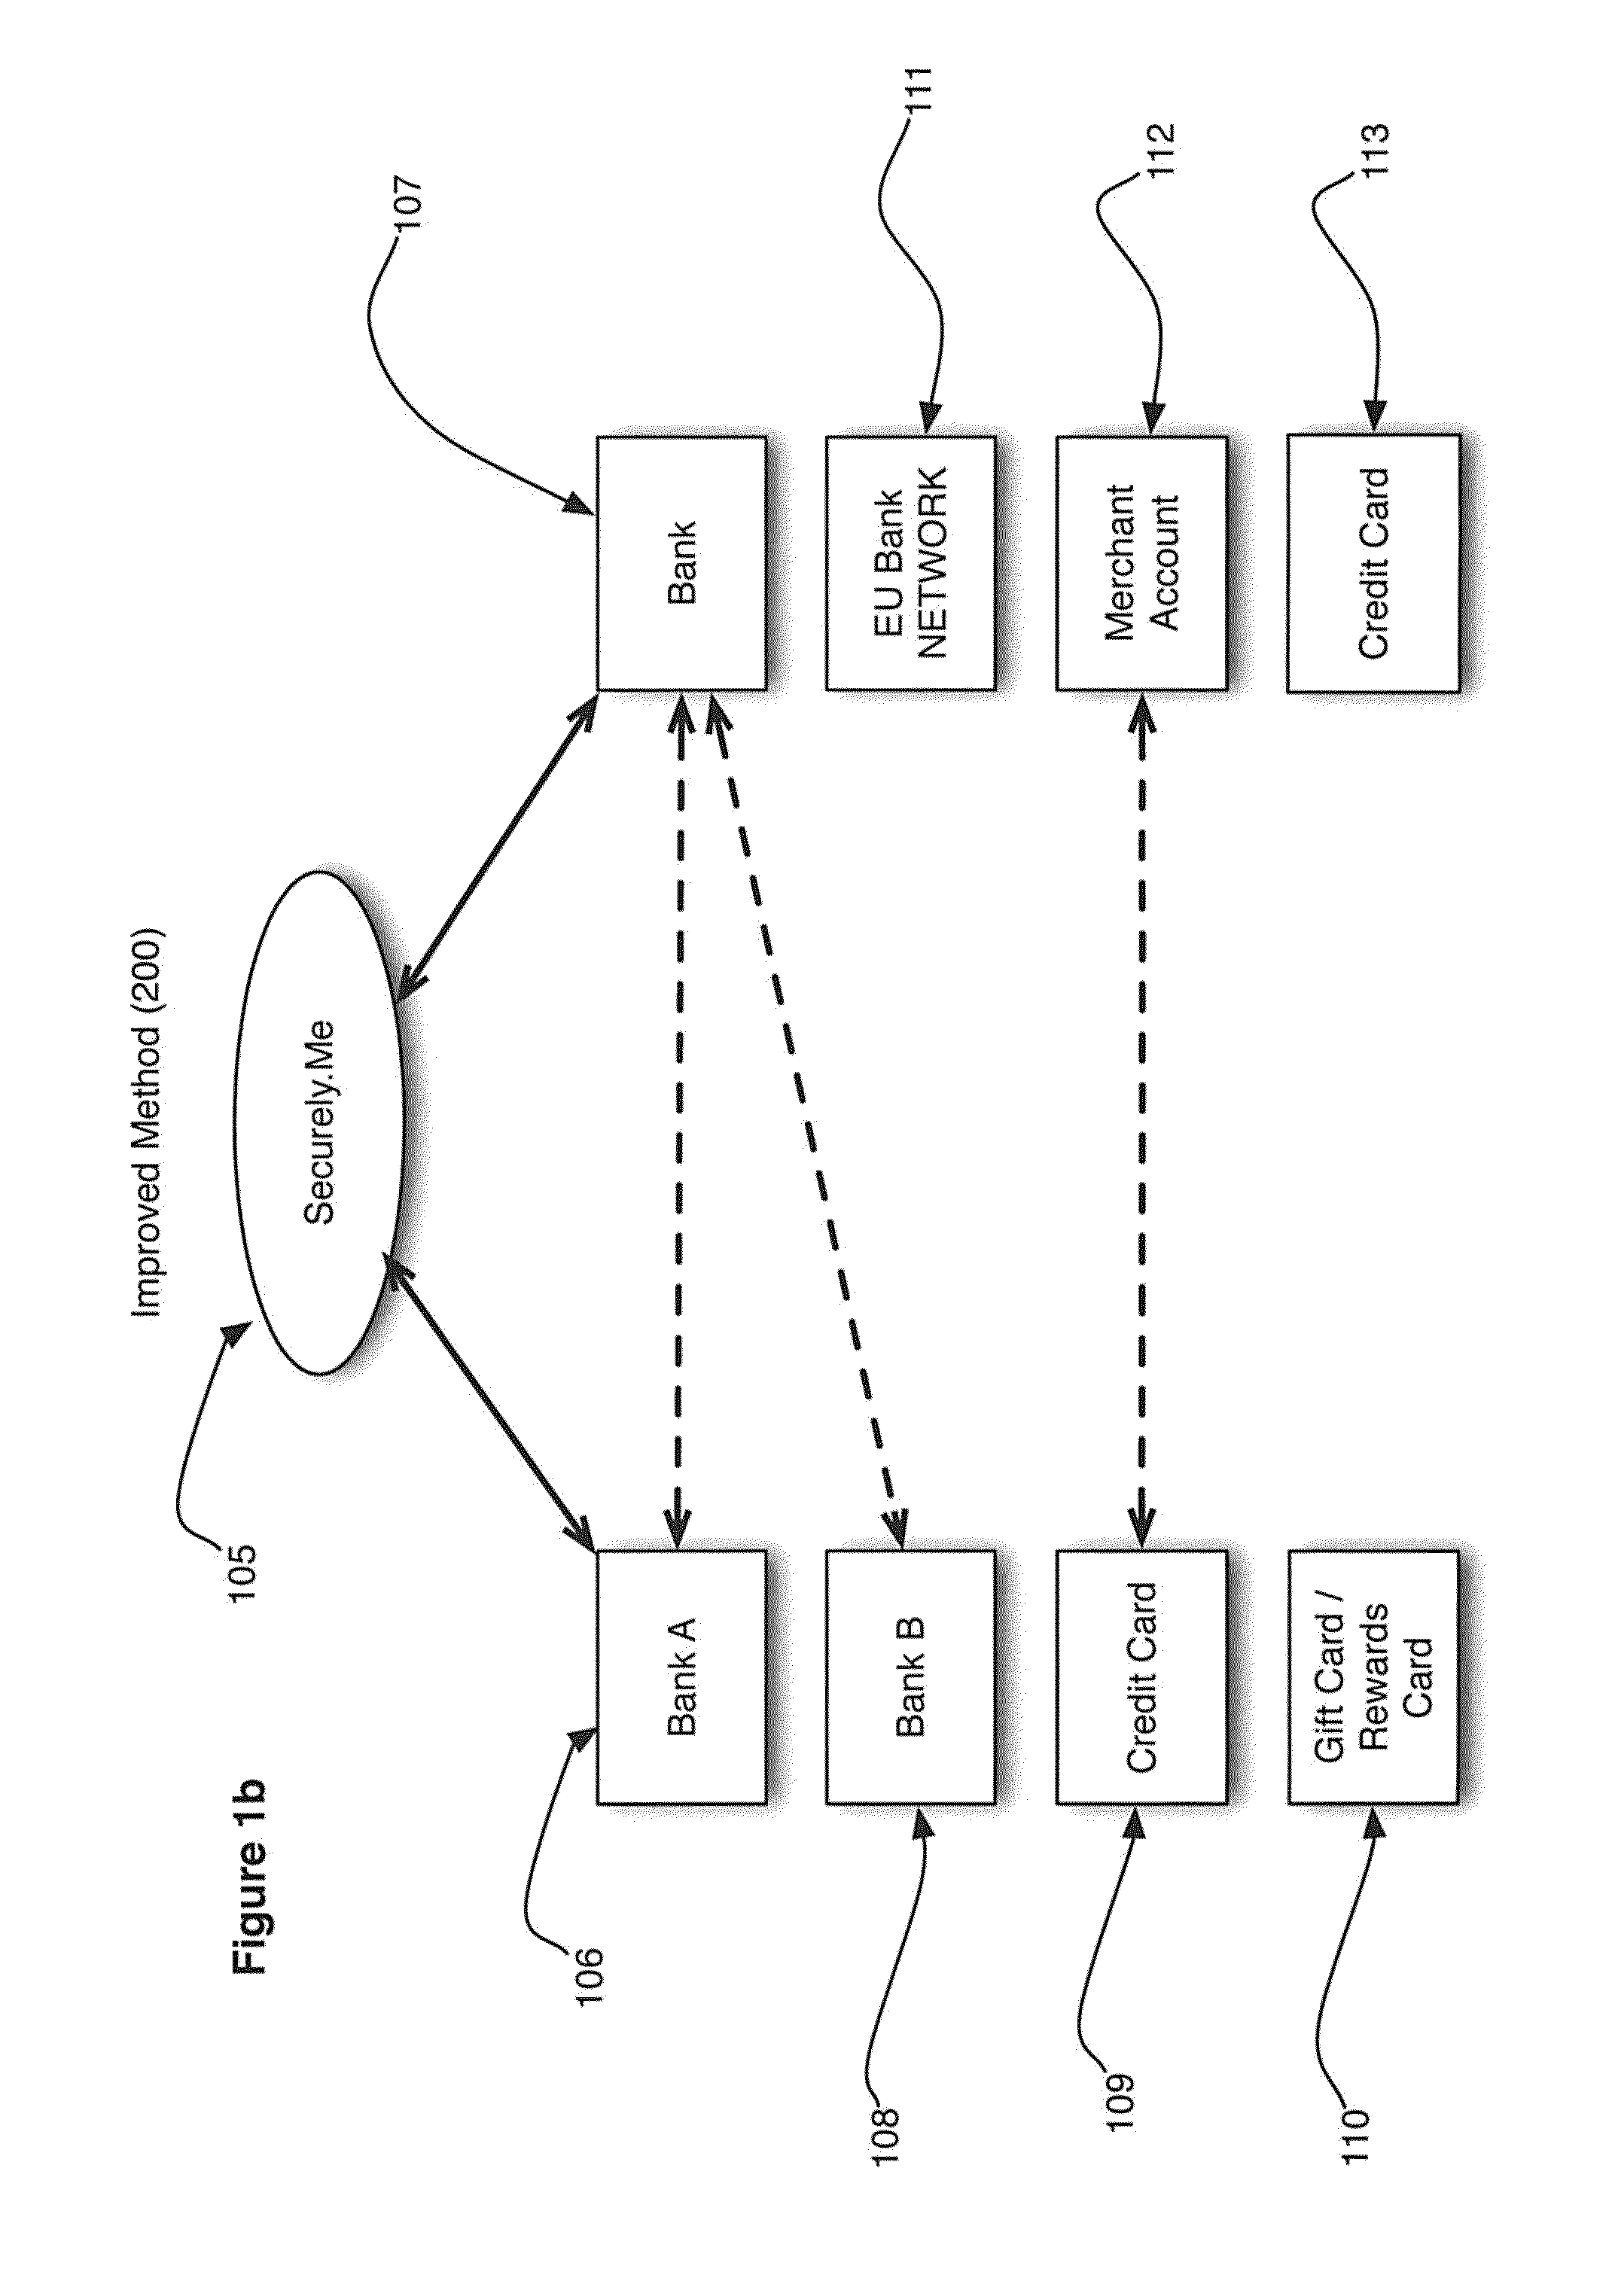 System and Method for Enhancing Electronic Transactions